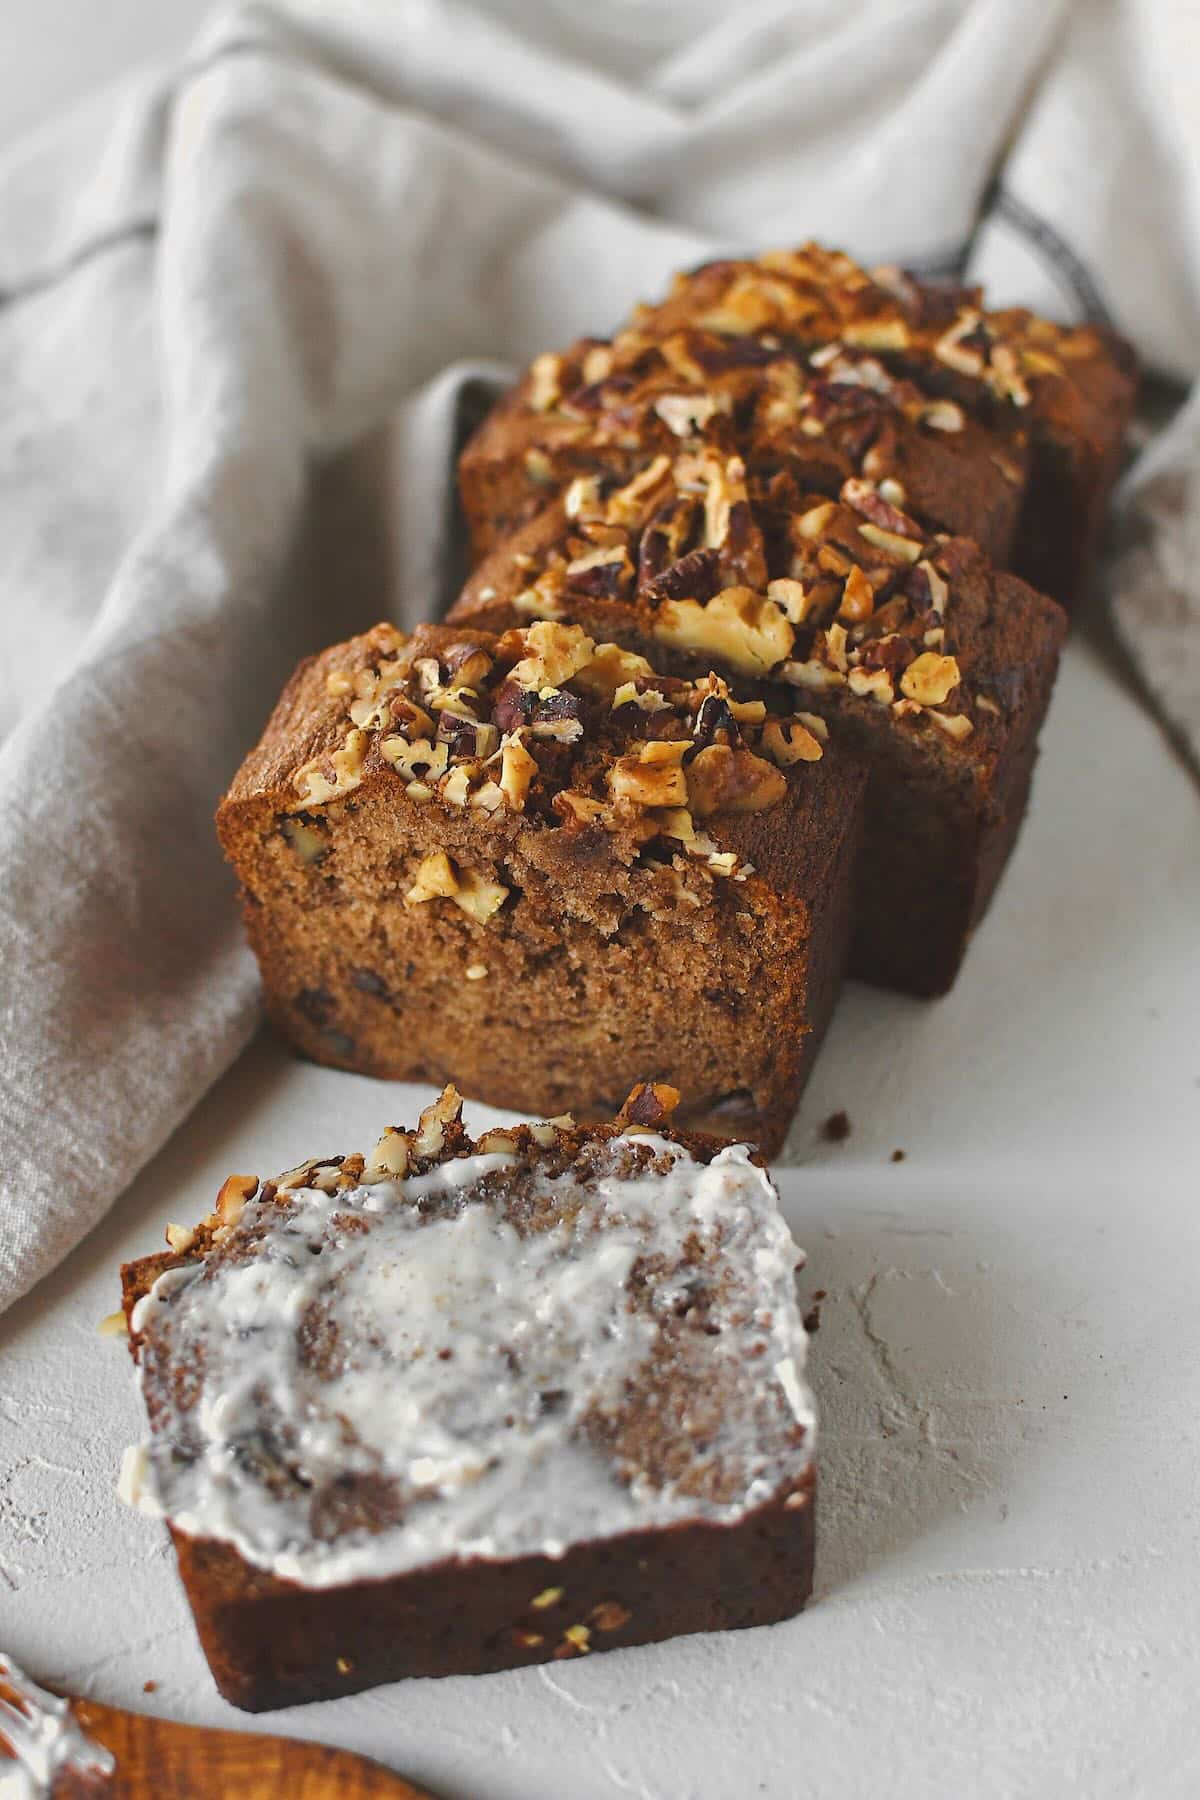 Sliced Starbucks Banana Bread Recipe ready to be enjoyed and topped with a smear of butter.